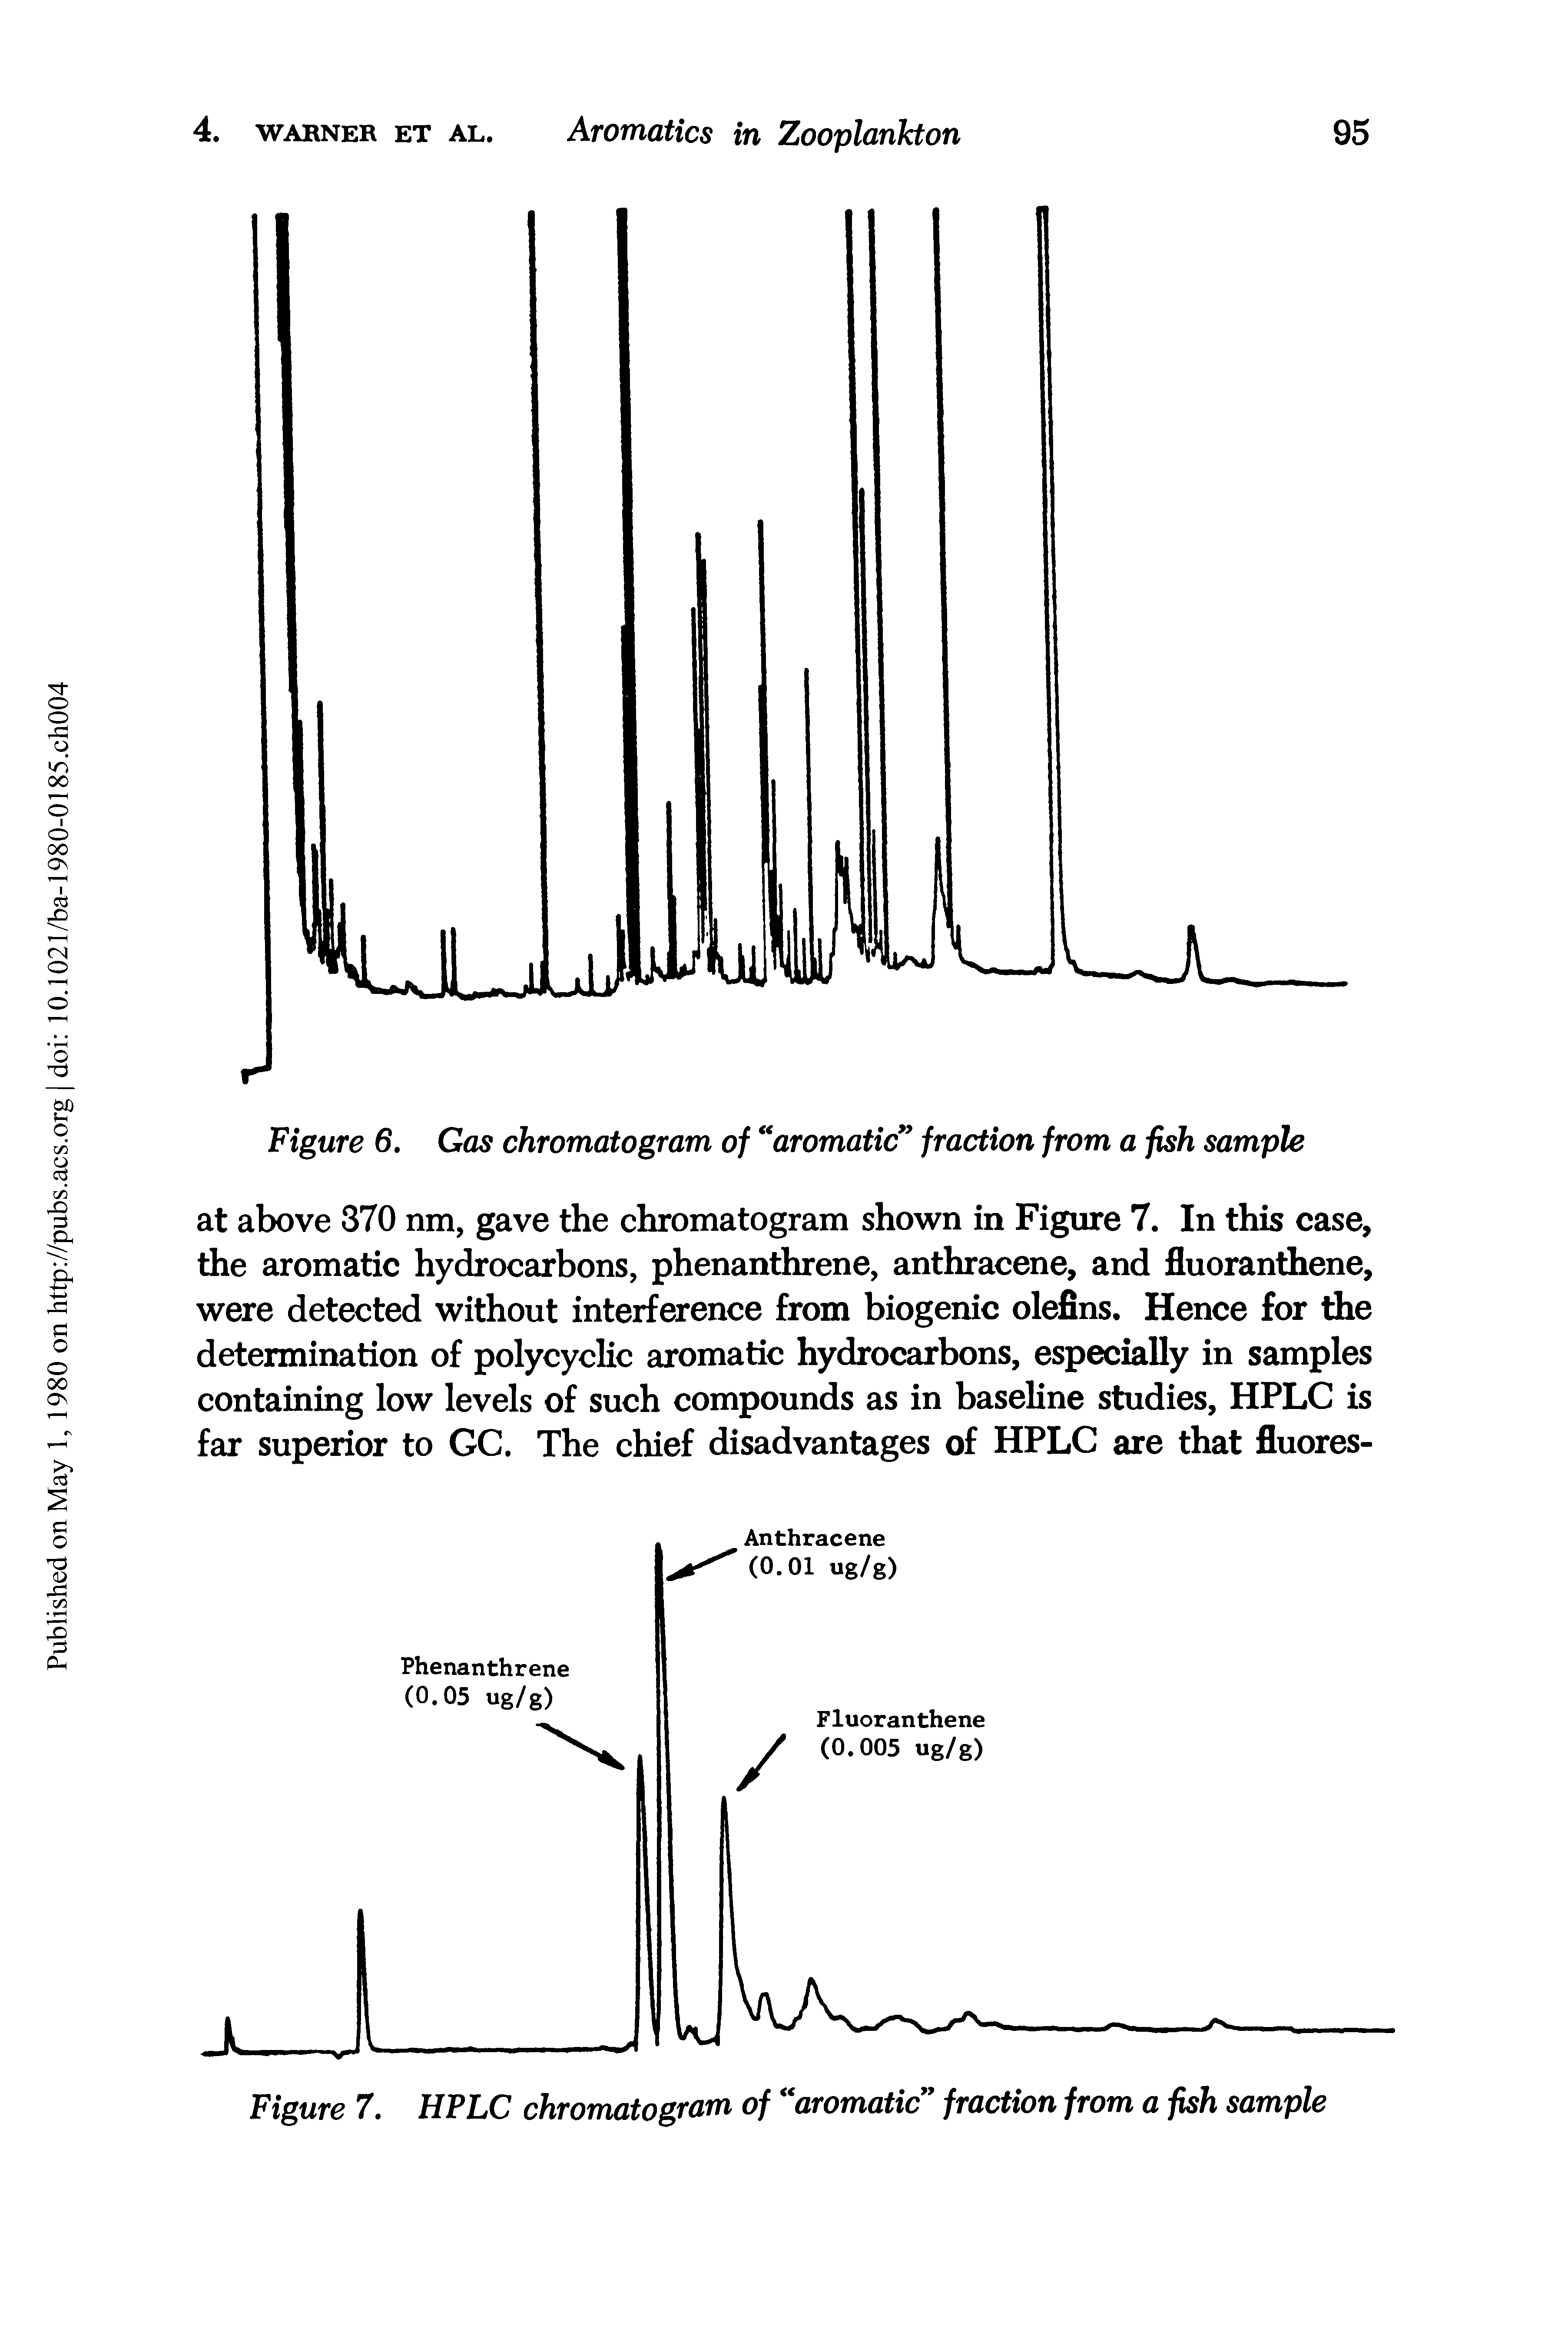 Figure 7. HPLC chromatogram of aromatic fraction from a fish sample...